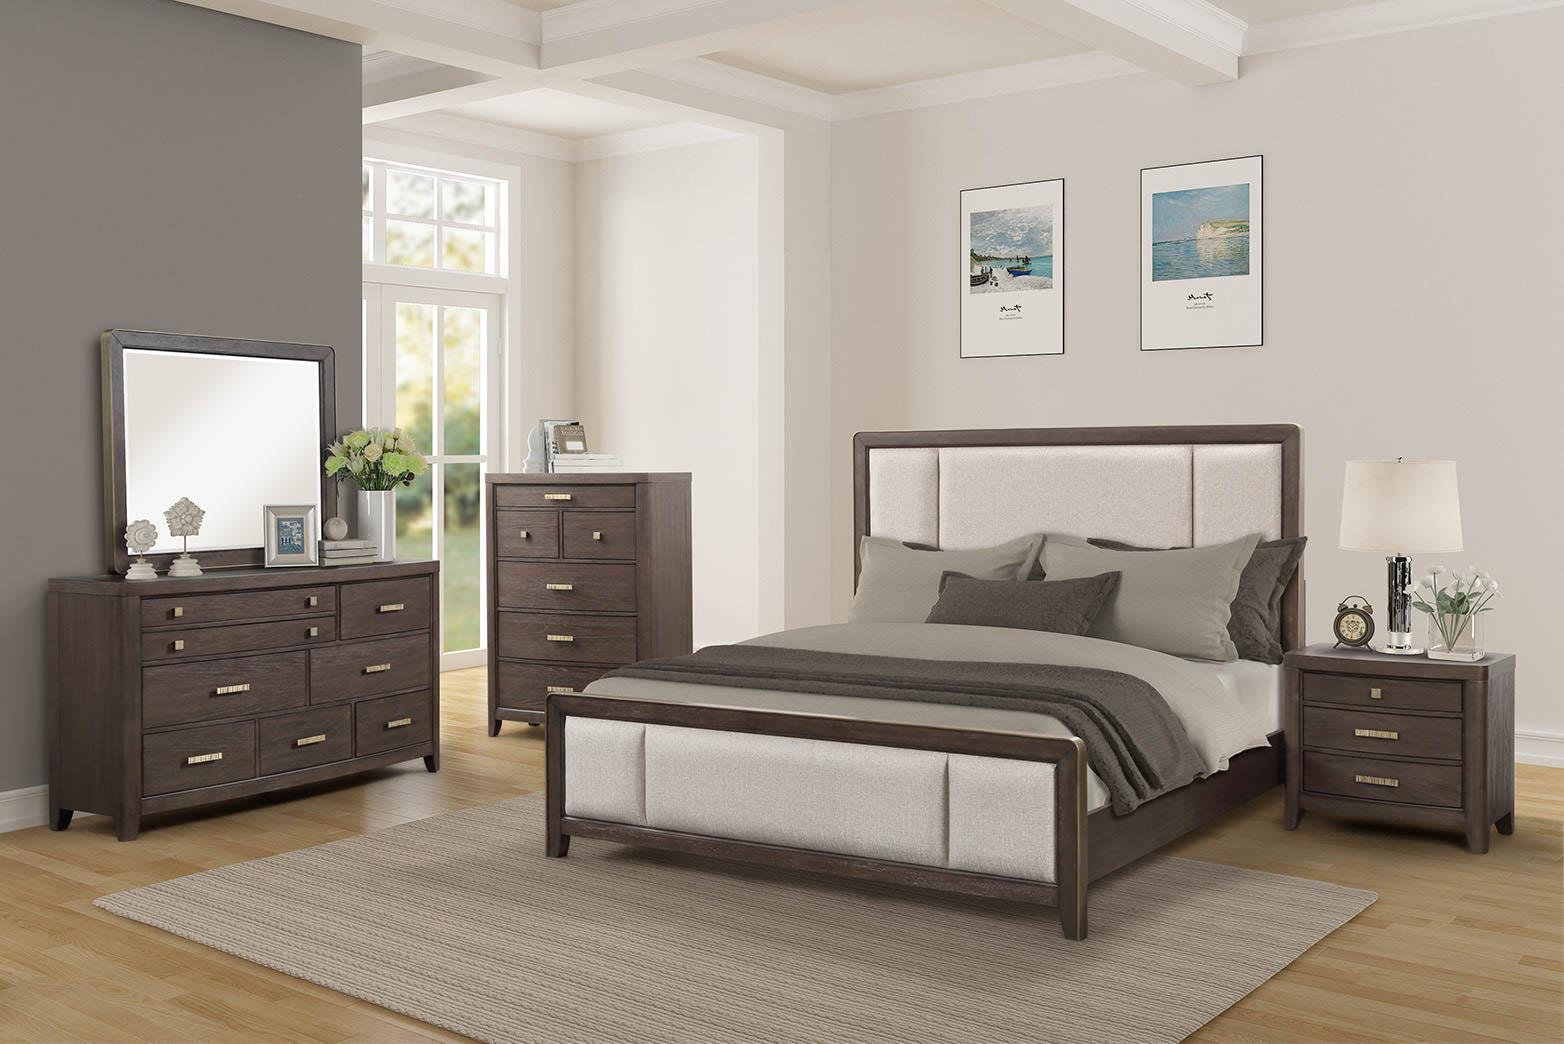 Classic, Transitional Panel Bed FULTON 1720-105 1720-105 in Taupe Microfiber